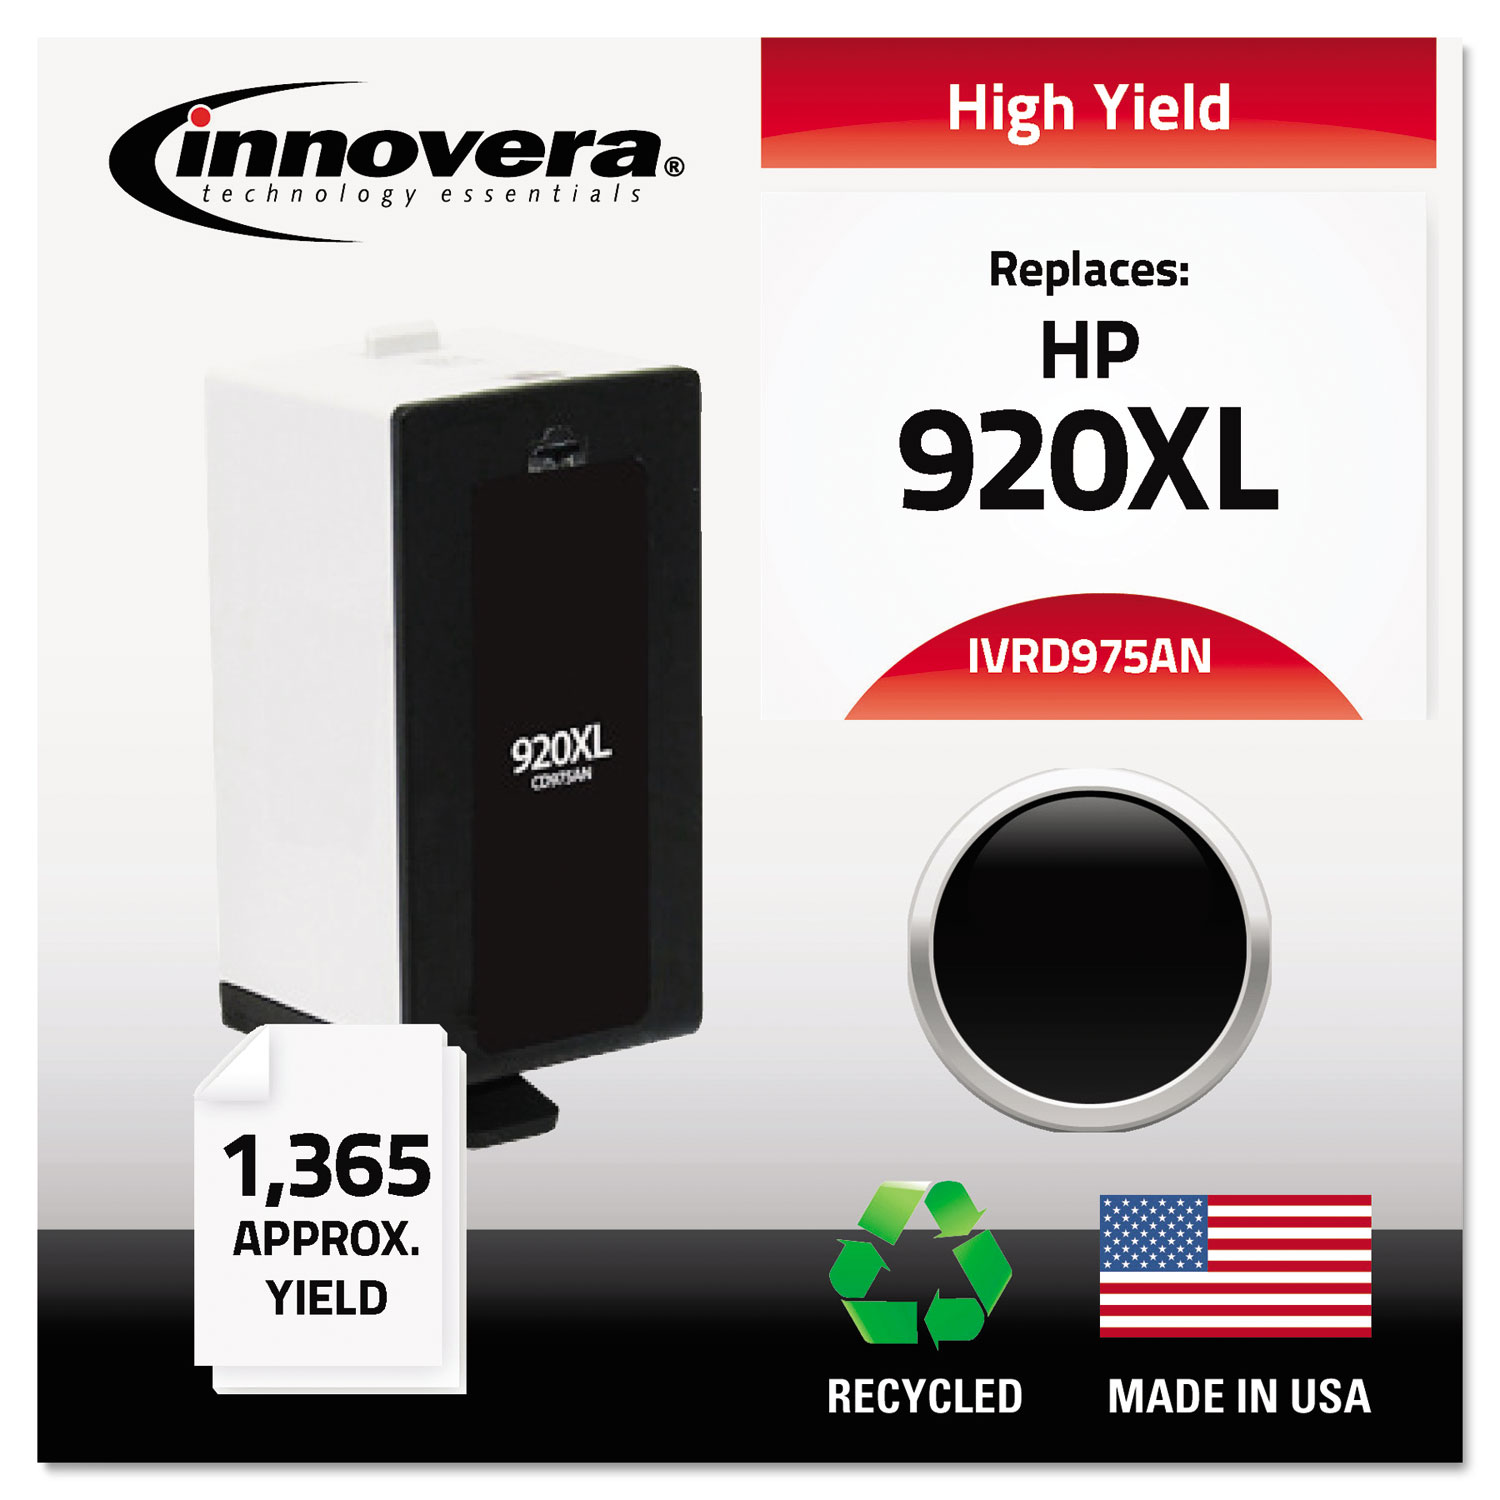  Innovera IVRD975AN Remanufactured CD975AN (920XL) High-Yield Ink, 1200 Page-Yield, Black (IVRD975ANC) 